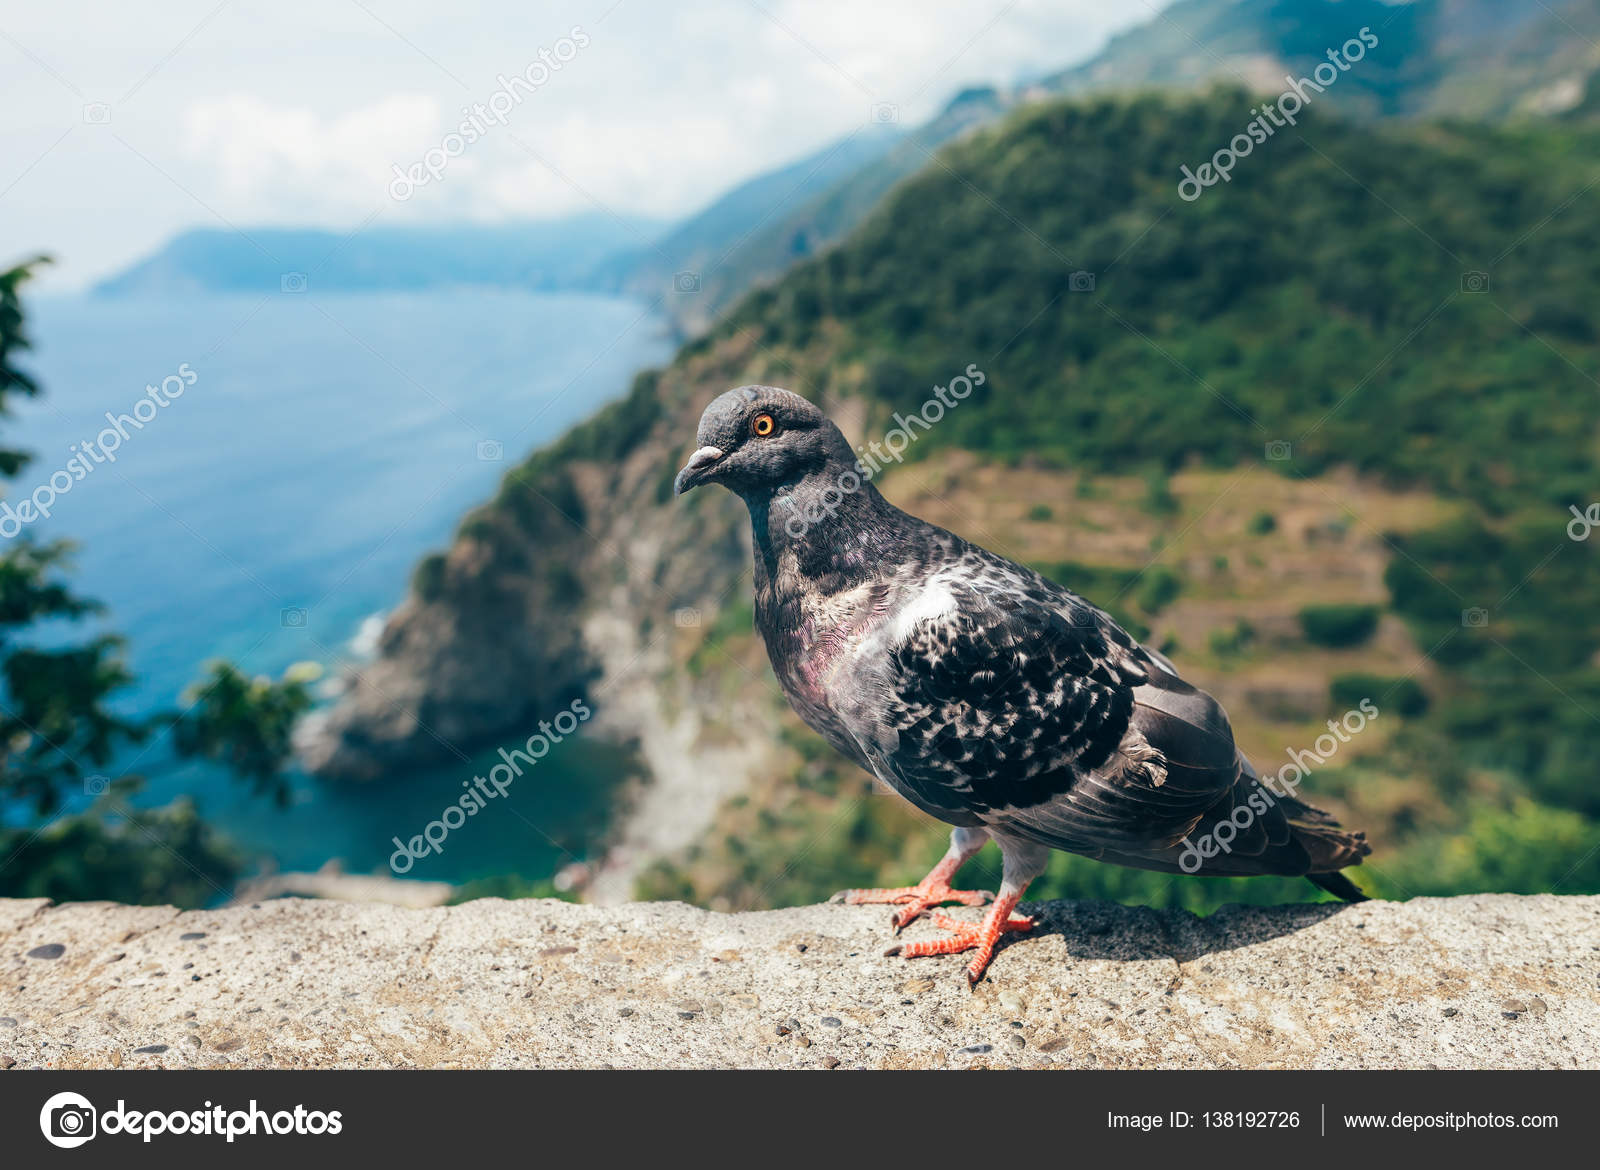 Funny pigeon Stock Photos, Royalty Free Funny pigeon Images | Depositphotos